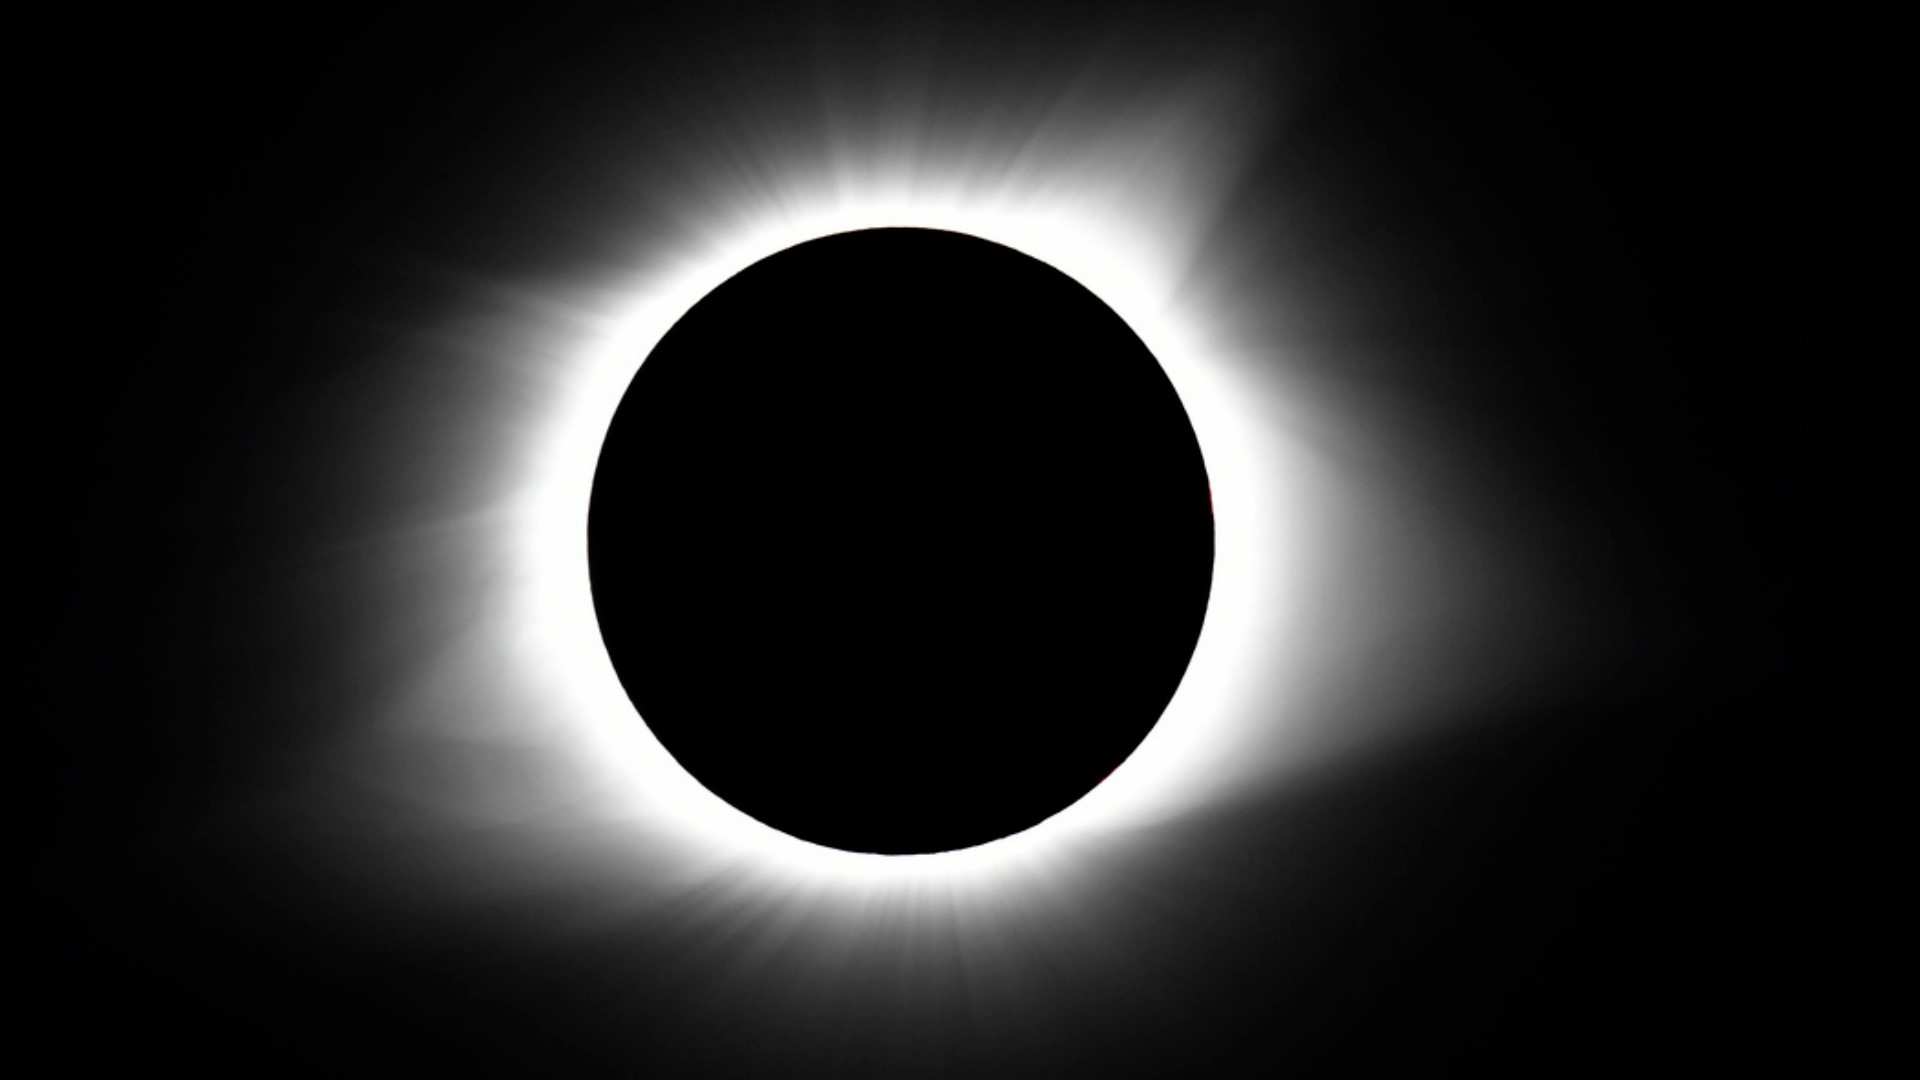 If you have FOMO (fear of missing out!) from seeing all the photos and videos of the rare total solar eclipse in less-cloudy regions, get out your calendar.